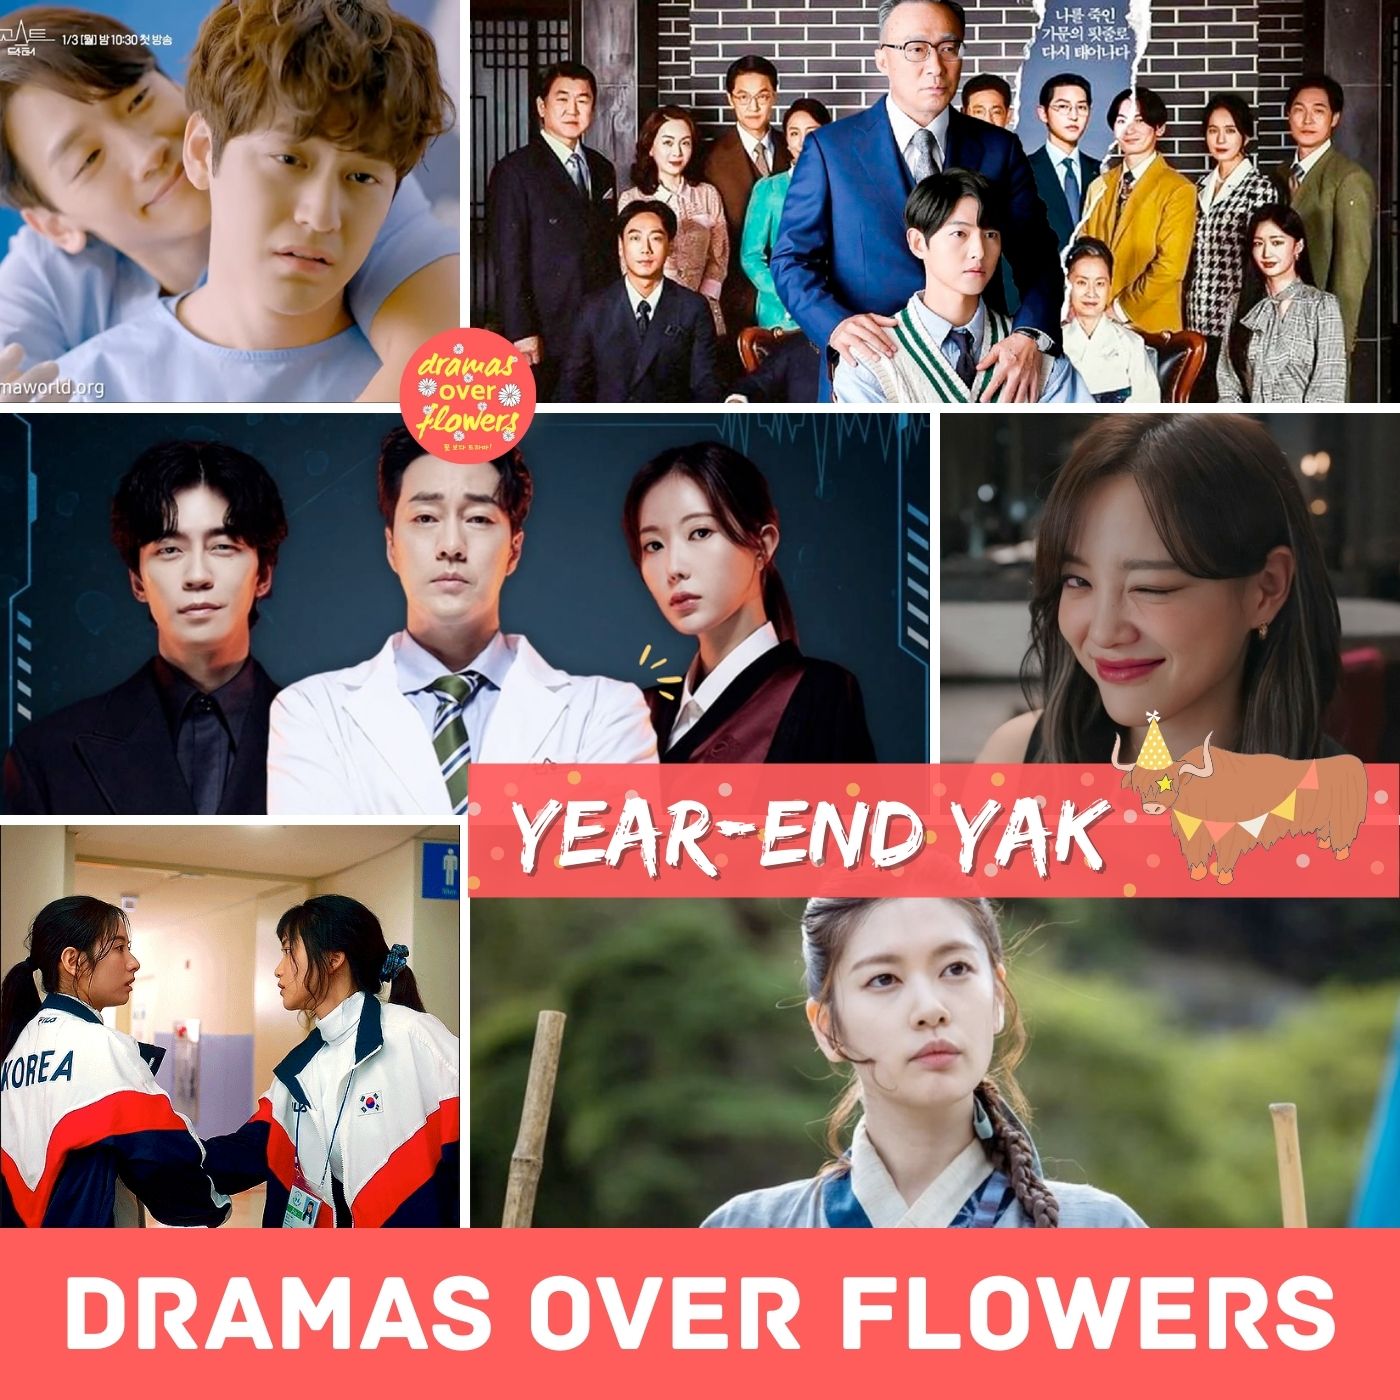 2022 in Dramaland: Year-End Yak Part 2 (Our Year In Dramas)